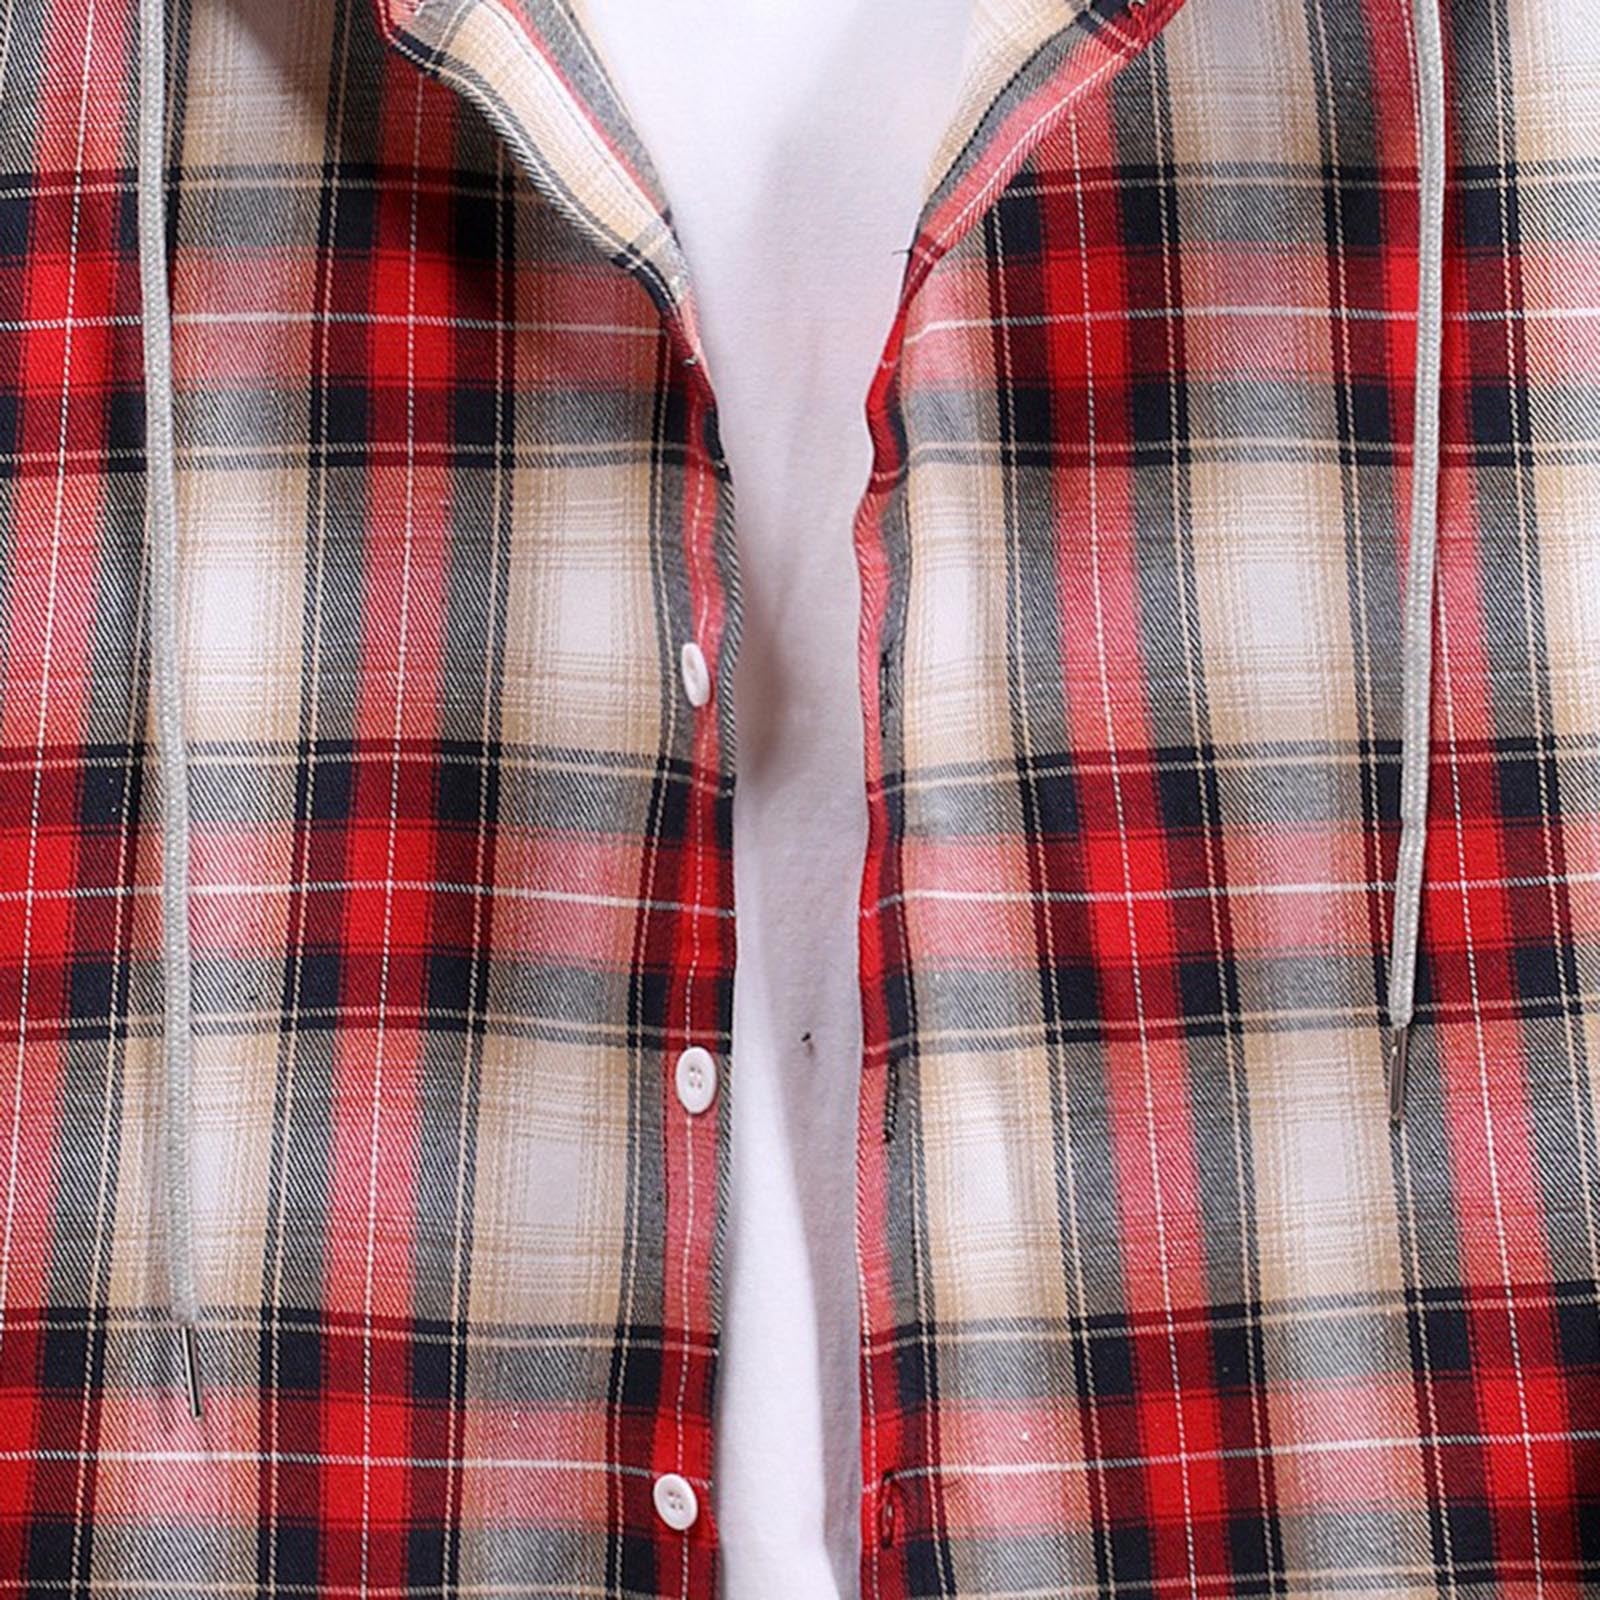 West Louis Men's Hooded Shirt Jacket Button Front Long Sleeve Plaid Size  Small